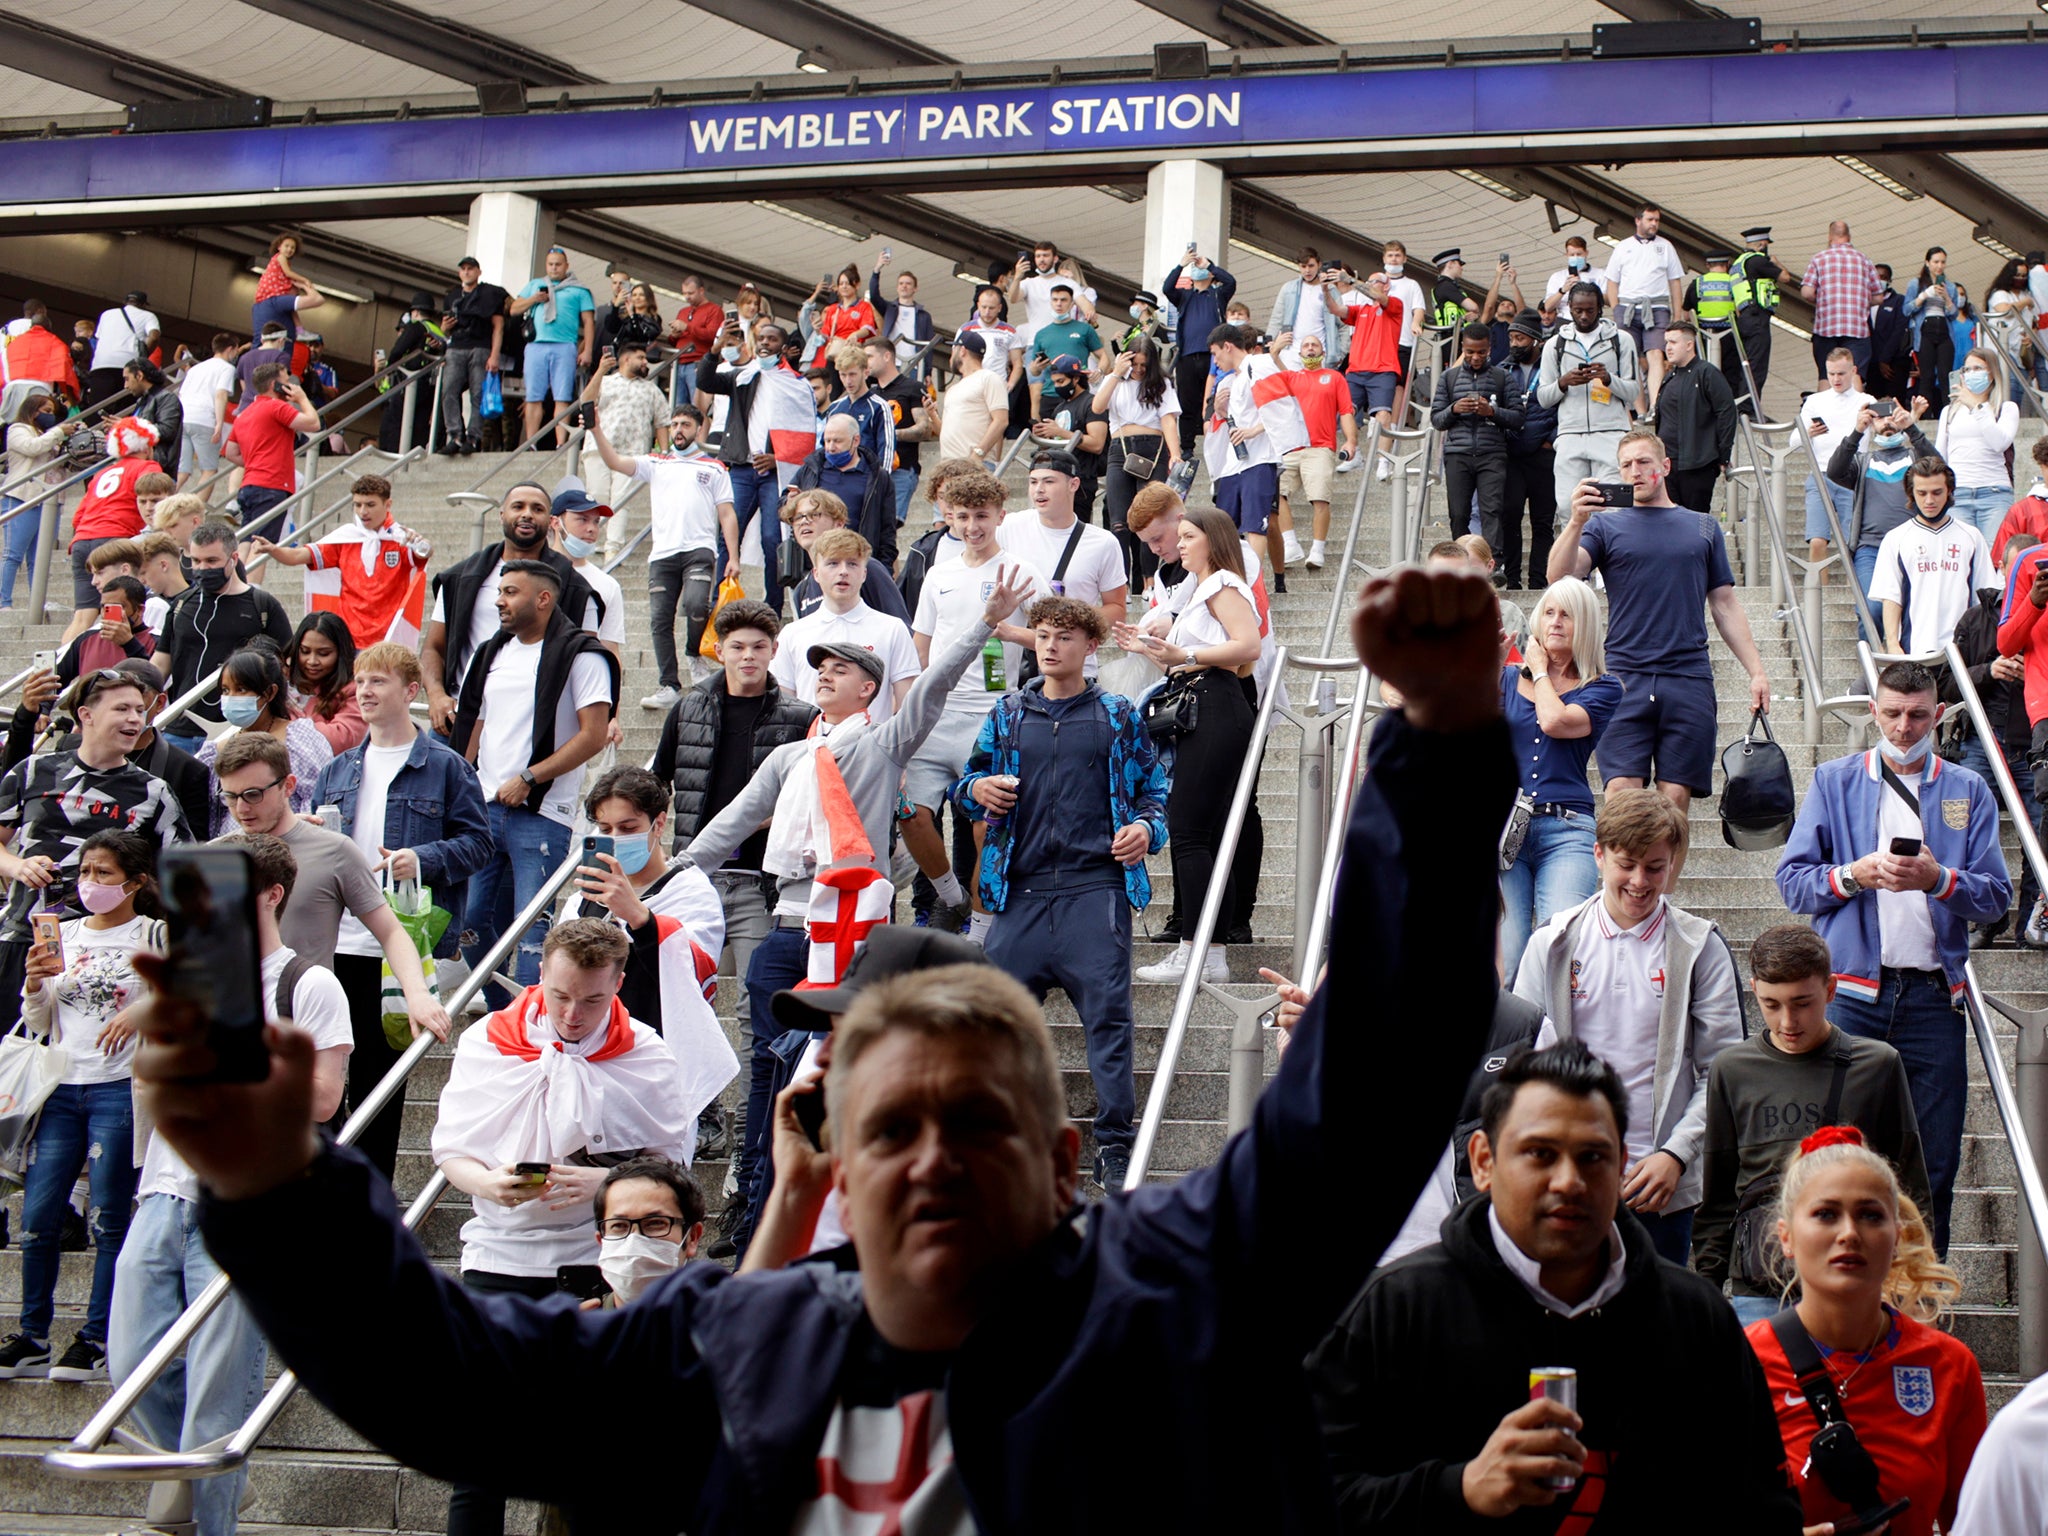 Up to 180,000 fans bought tickets to the Euro 2020 semi-finals and final at Wembley